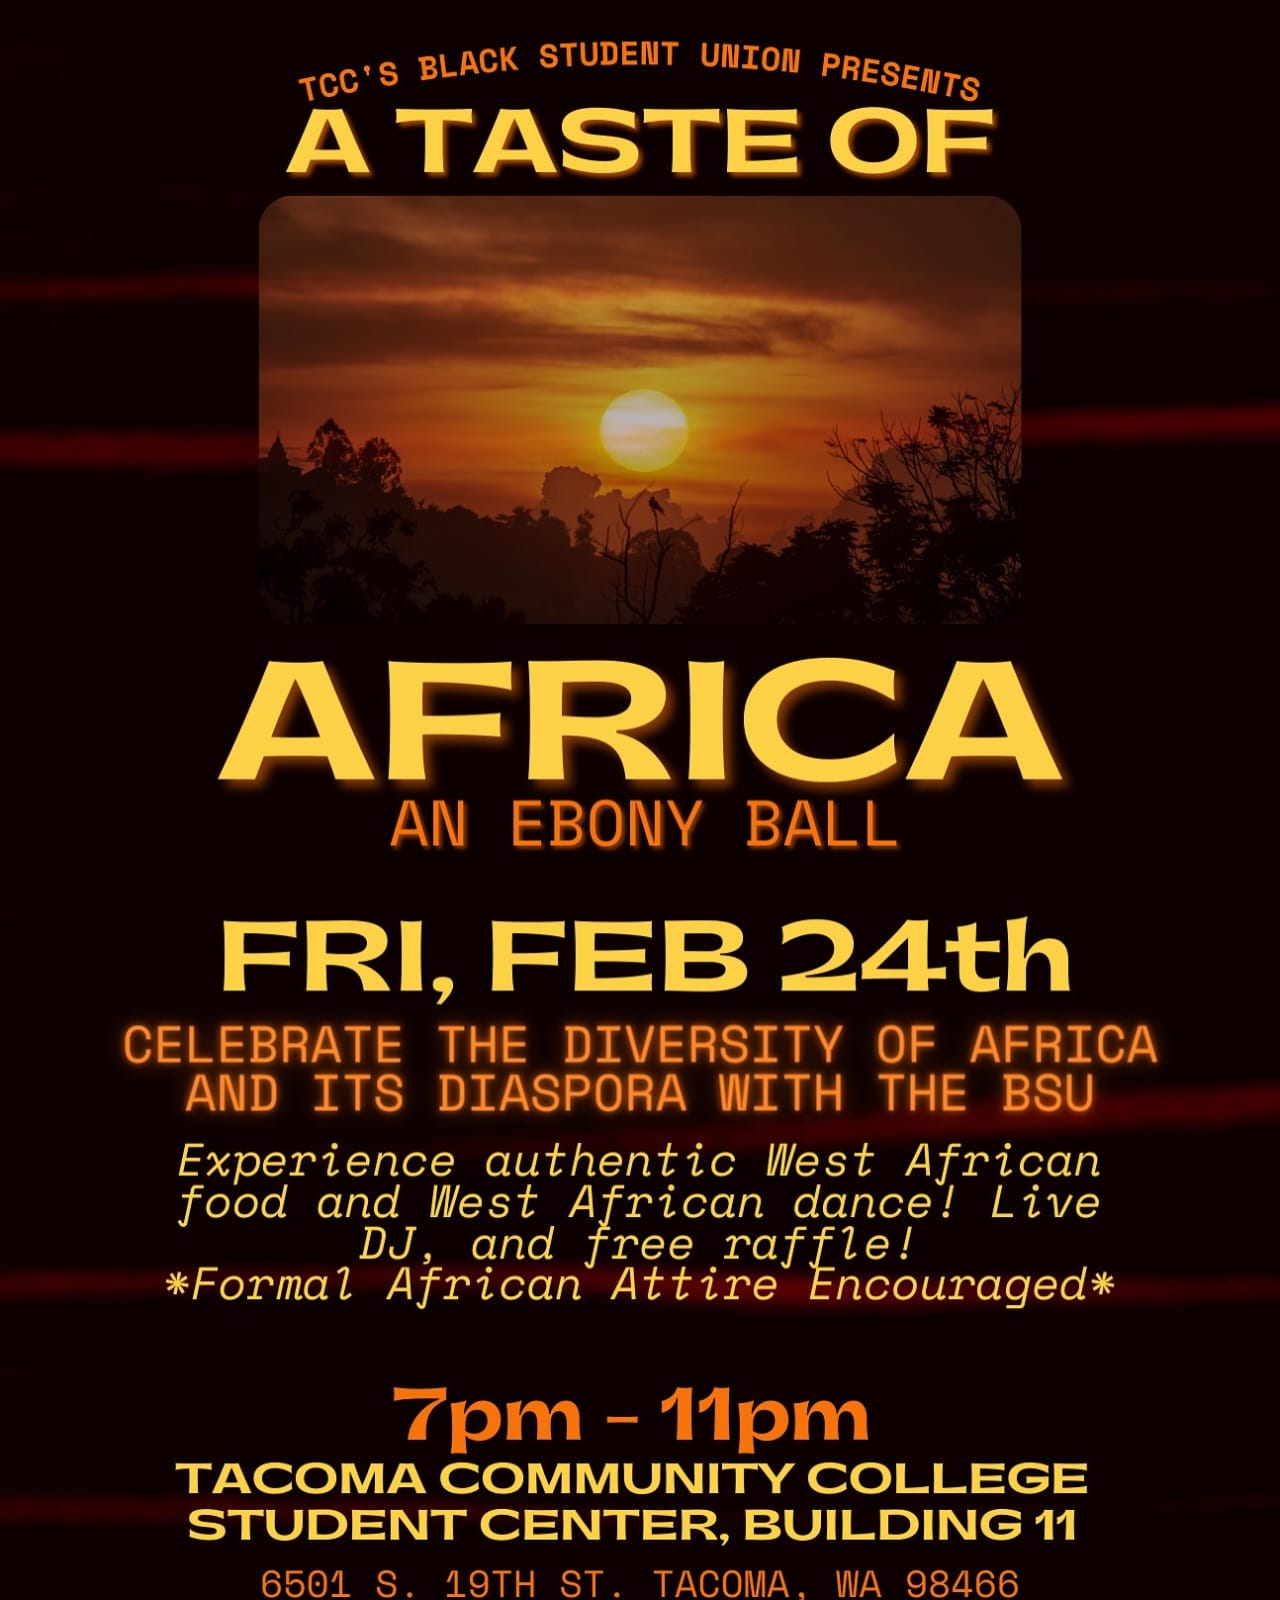 A poster for an african event with the sun setting.